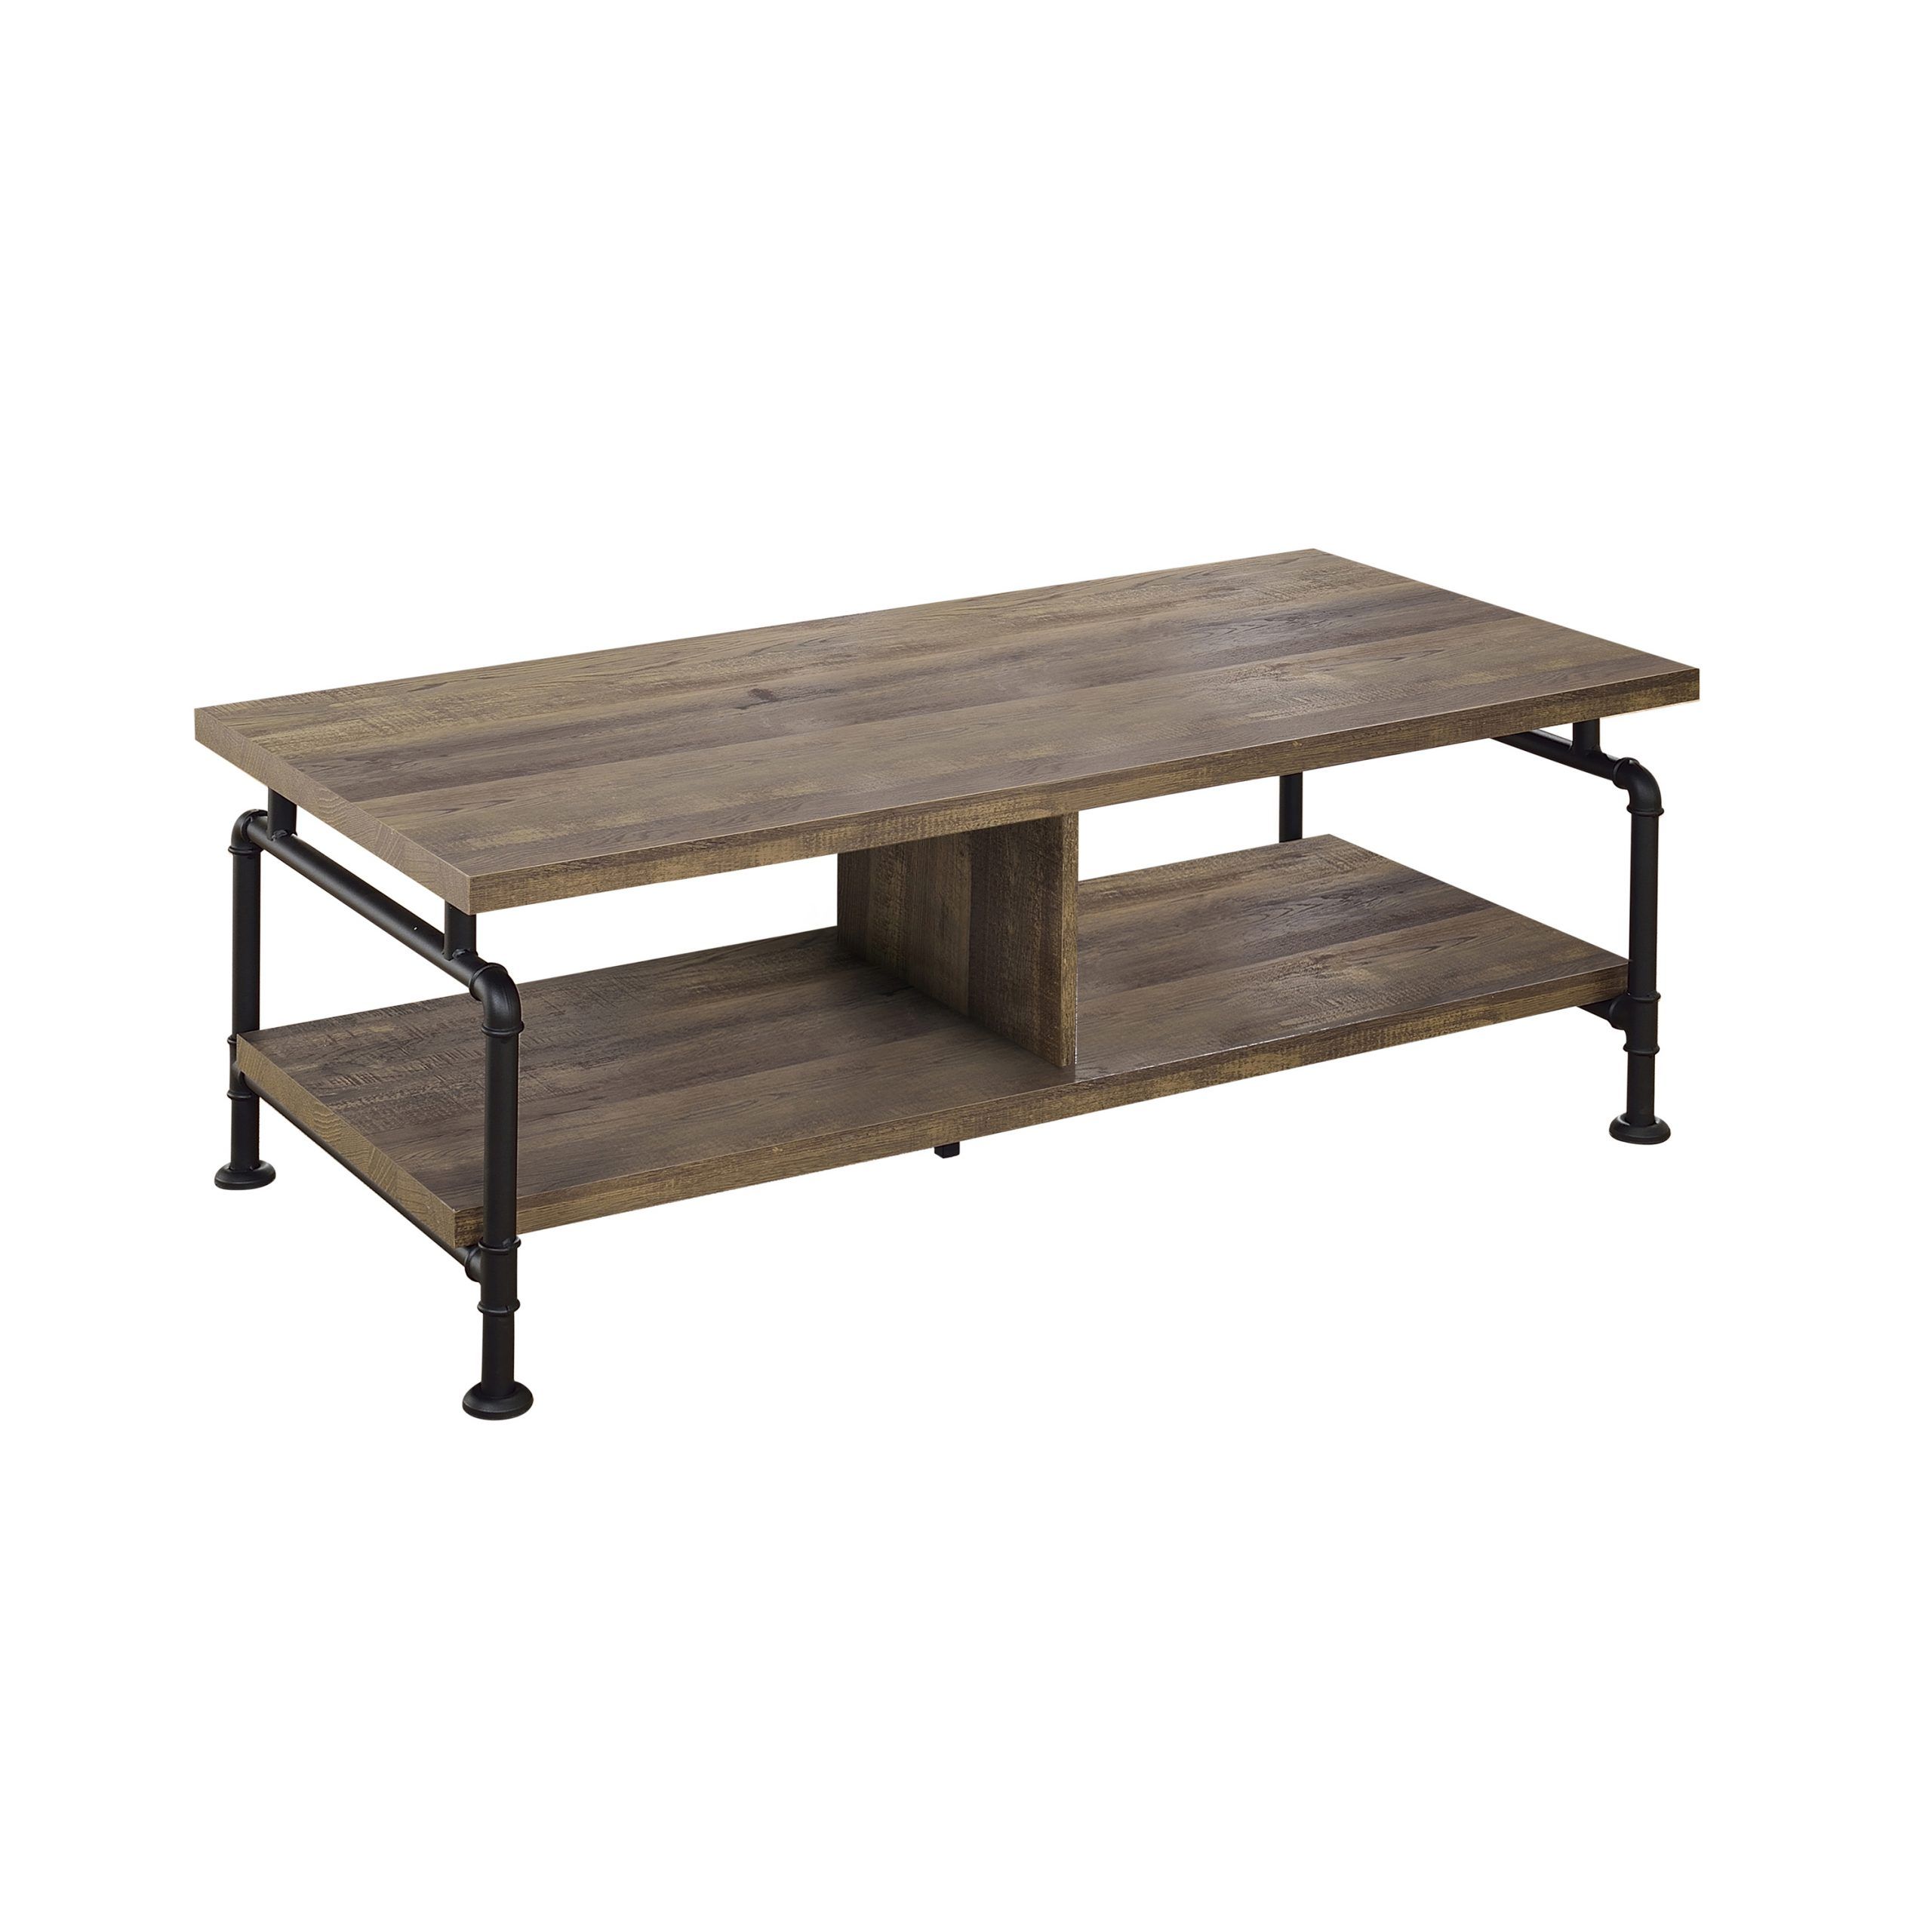 Shelf Storage Coffee Table Rustic Oak And Black – Coaster Fi Regarding Rustic Oak And Black Coffee Tables (View 17 of 20)